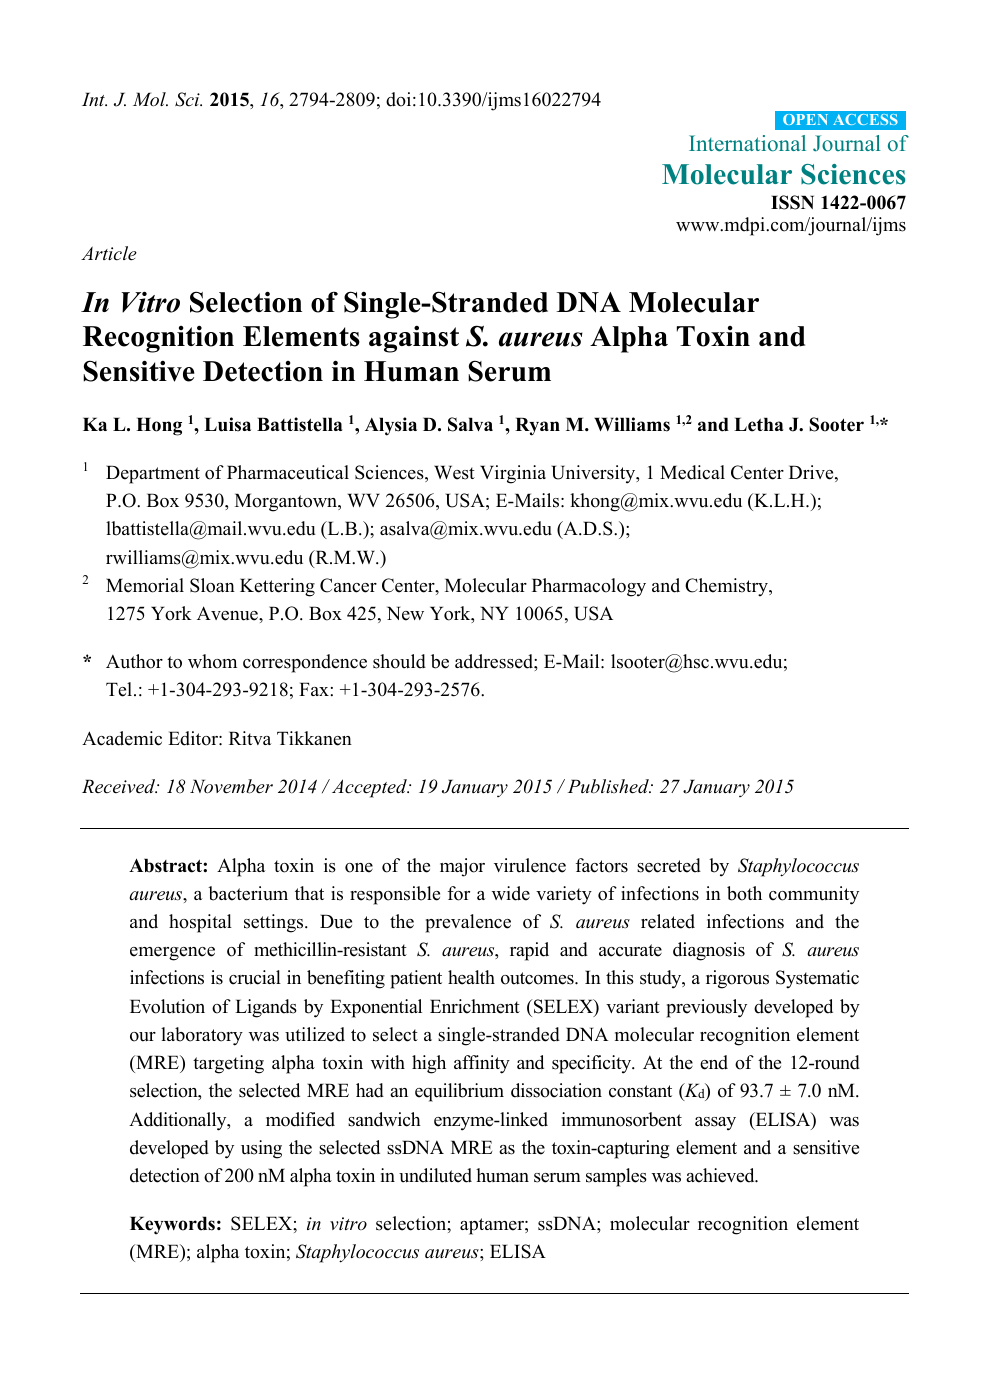 In Vitro Selection Of Single Stranded Dna Molecular Recognition Elements Against S Aureus Alpha Toxin And Sensitive Detection In Human Serum Topic Of Research Paper In Clinical Medicine Download Scholarly Article Pdf